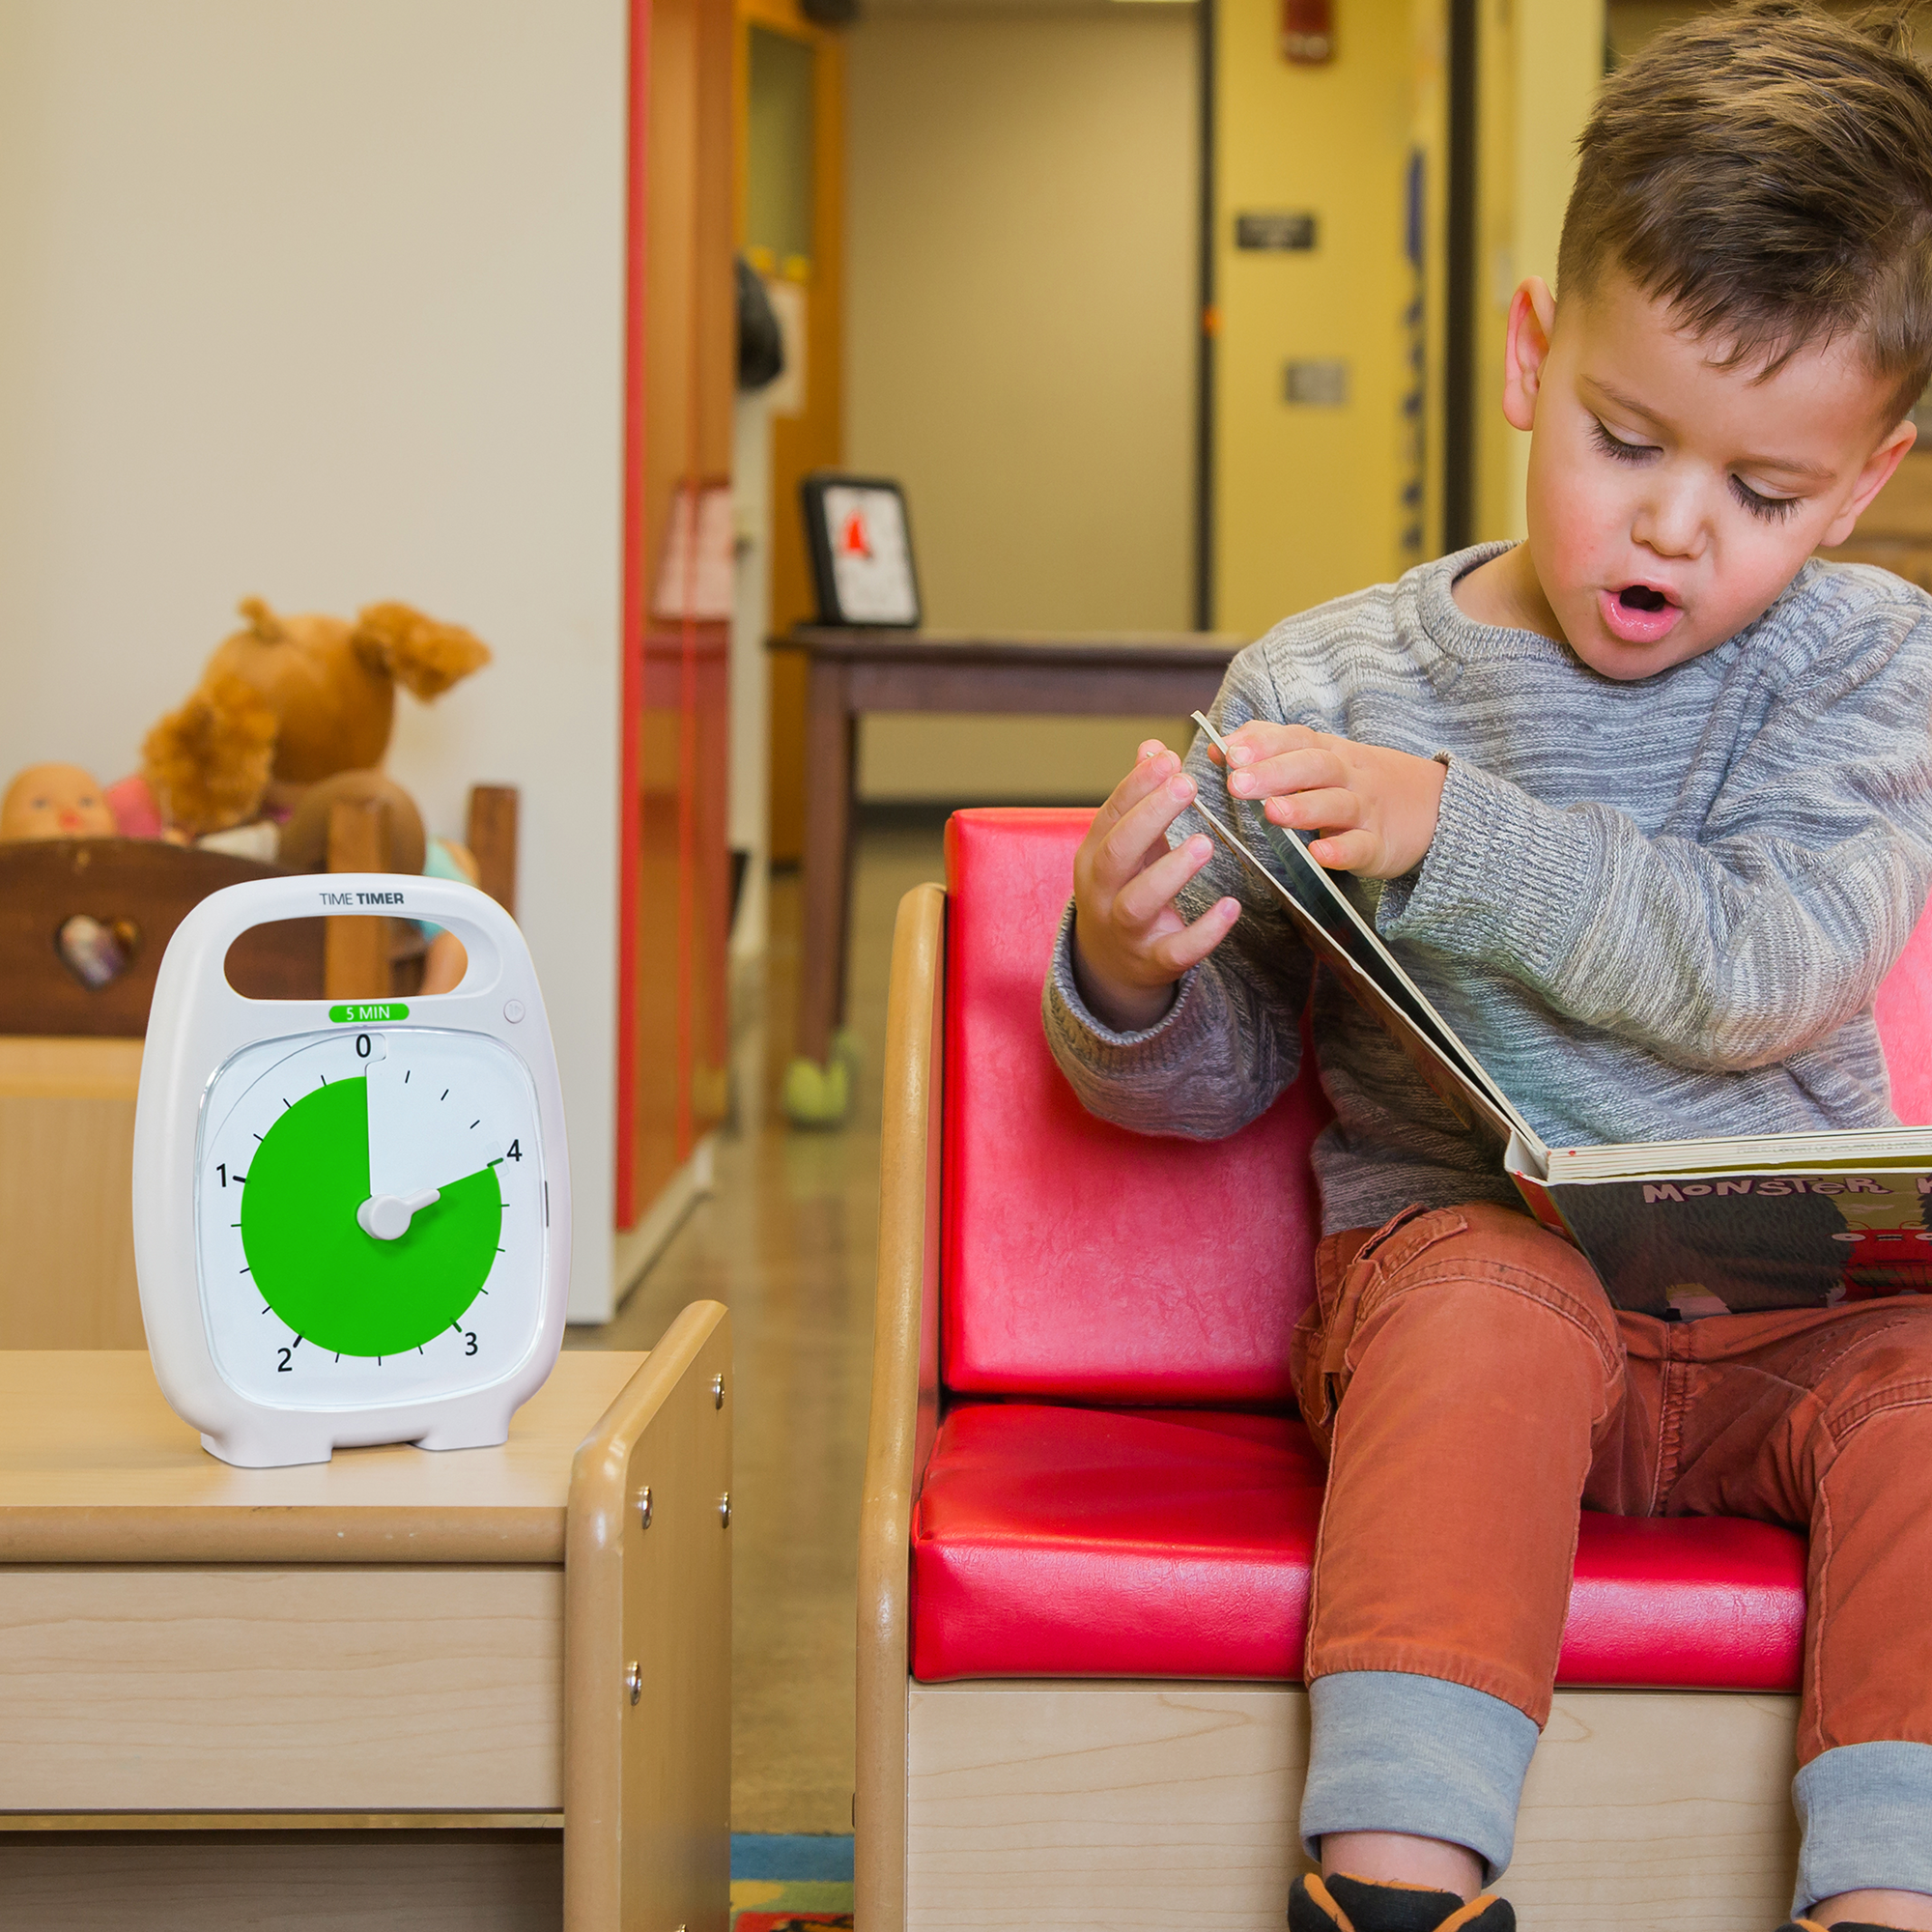 A young boy is sitting on a small couch in his preschool room, looking at a book. The Time Timer PLUS 5 minute visual timer is sitting on a small table next to him. The green disk of the timer is set to 4 minutes to show the child how much longer to spend on the book before moving to the next station.